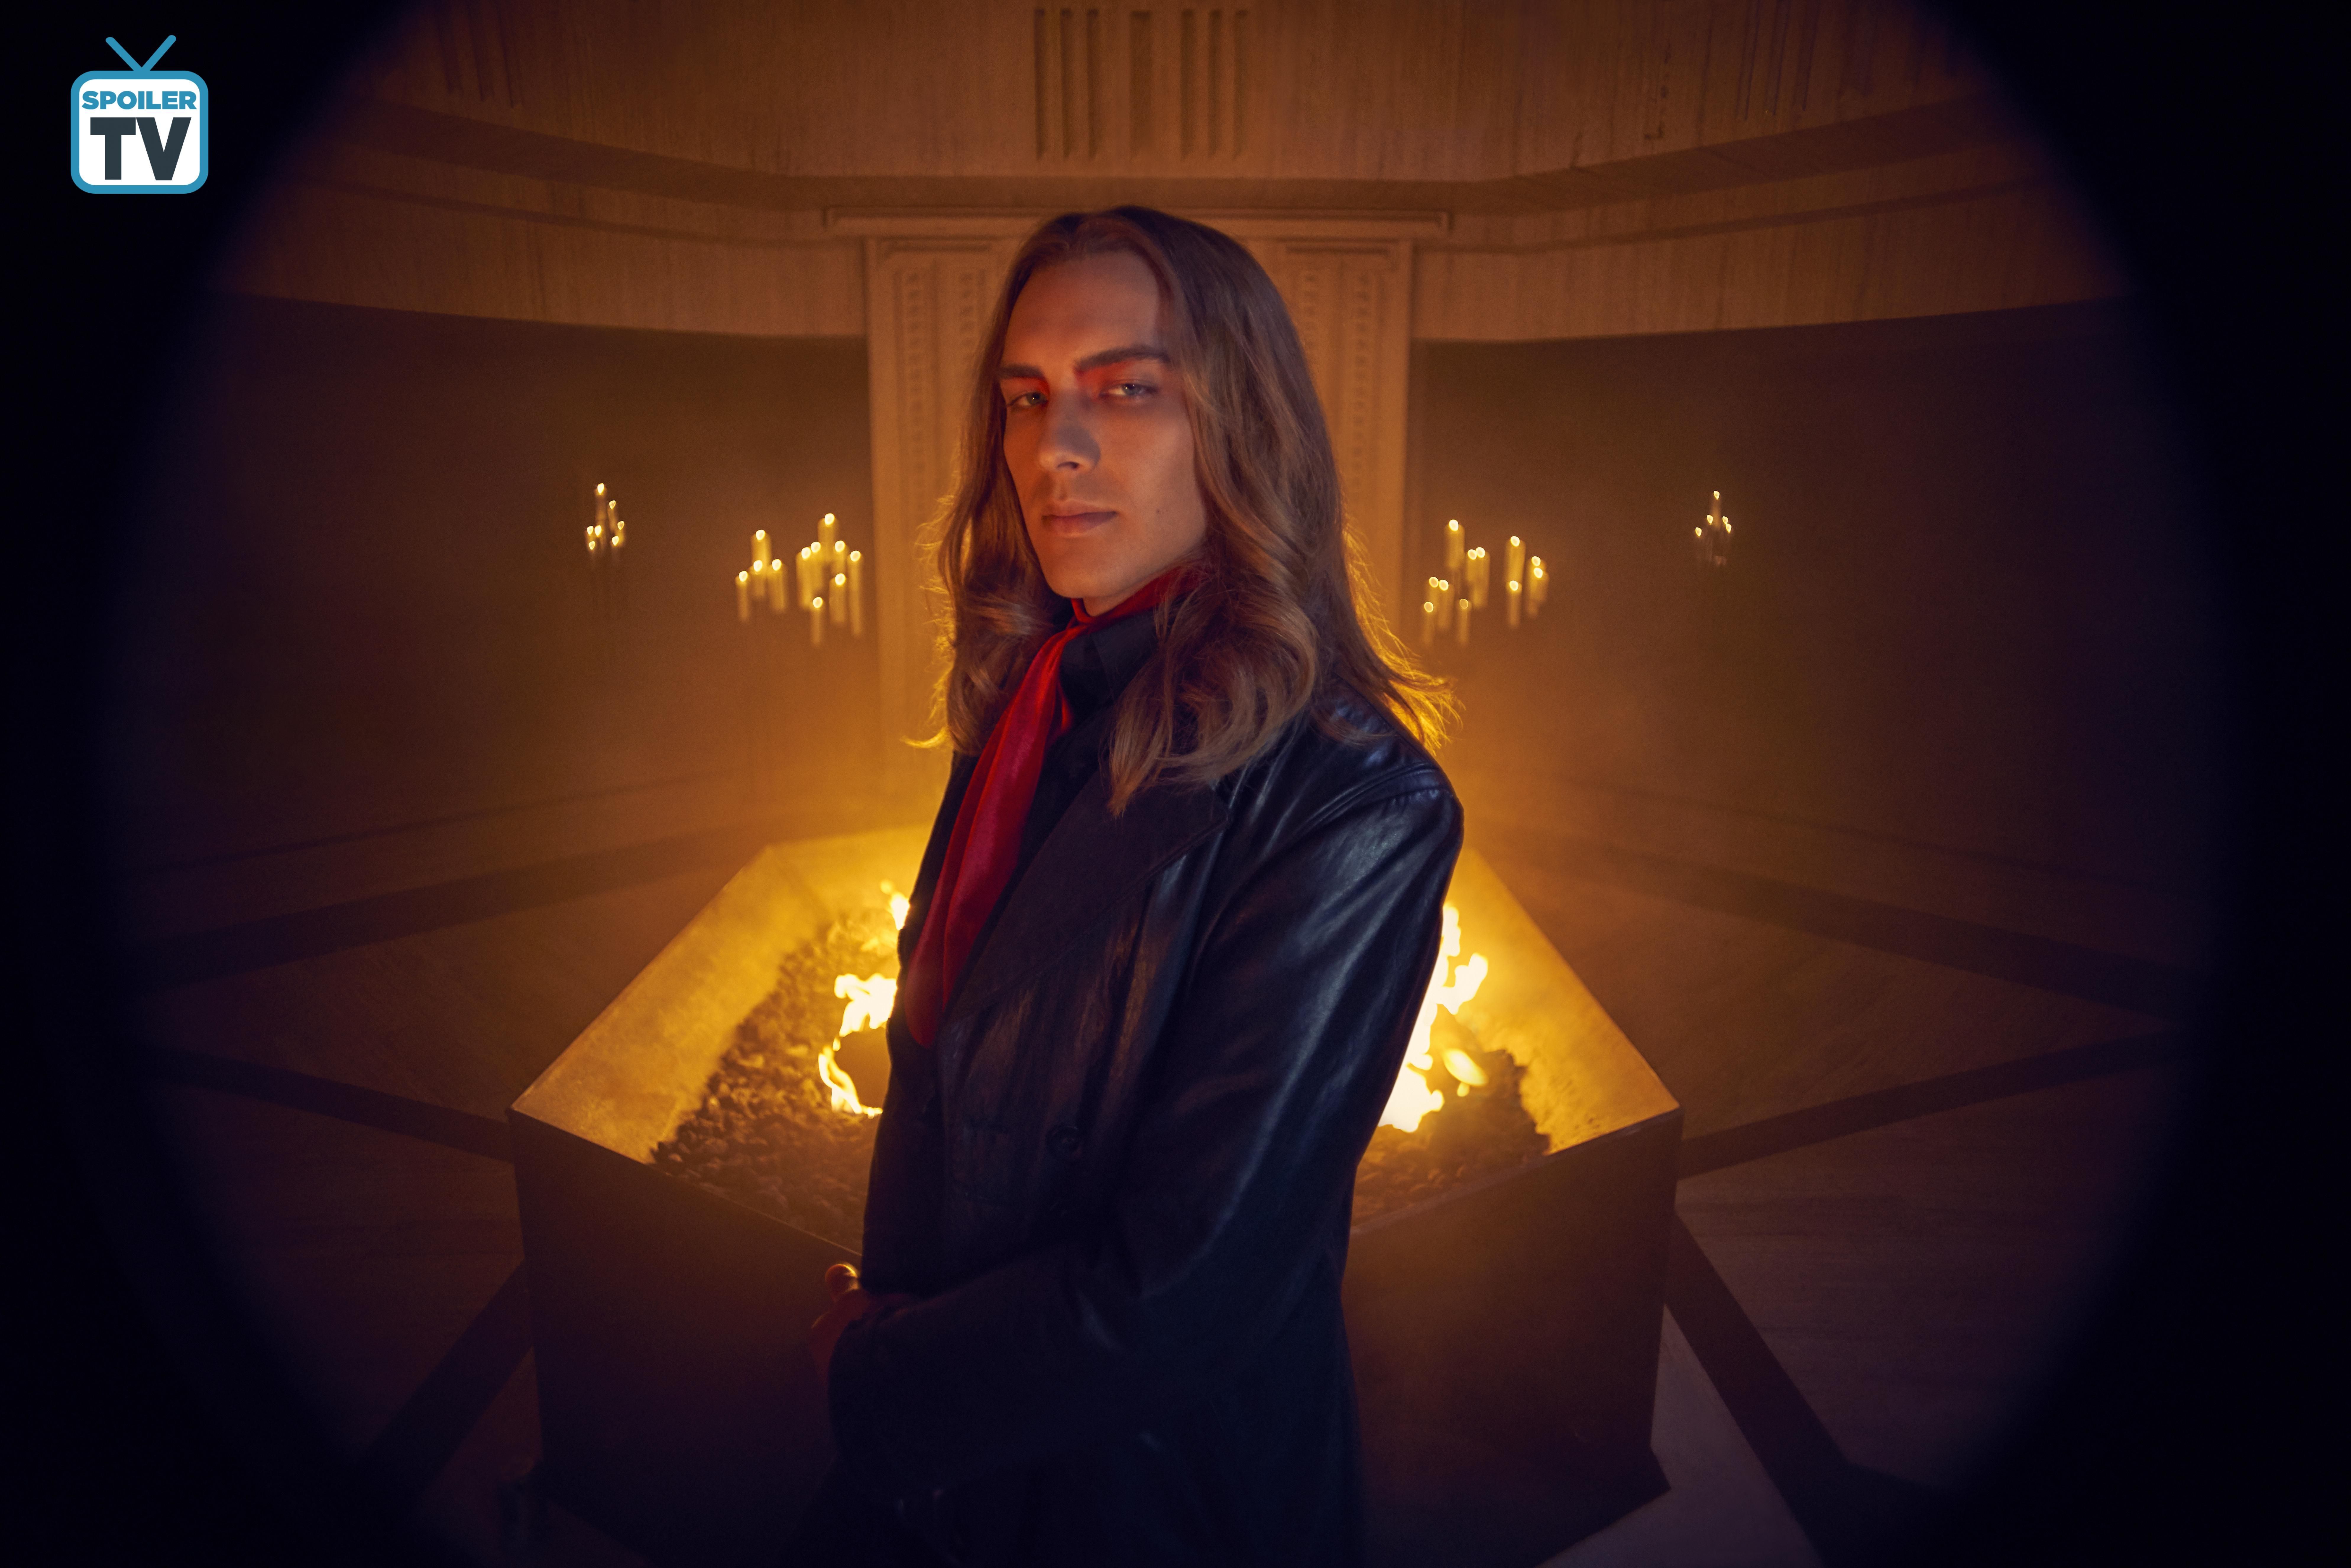 American Horror Story: Apocalypse' Character Promotional Photo